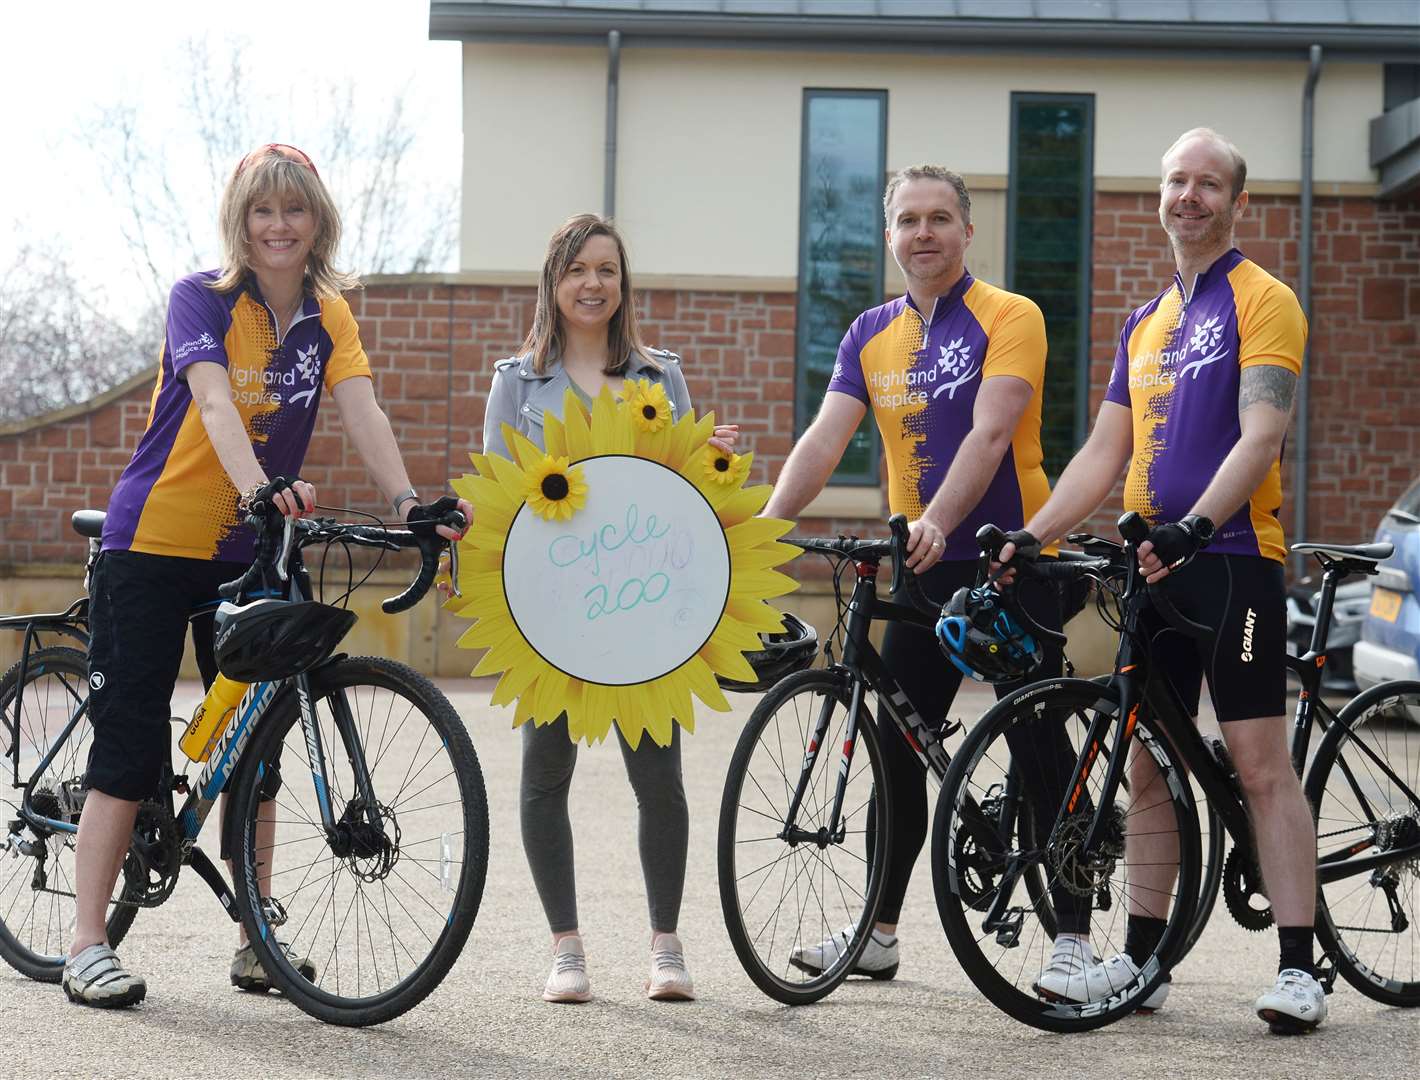 Hospice Cycle 200 challenge. Carrie MacDonald of the Hospice with willing volunteers Nicky Marr, Steve Barron and Paul Robinson. Picture Gary Anthony.